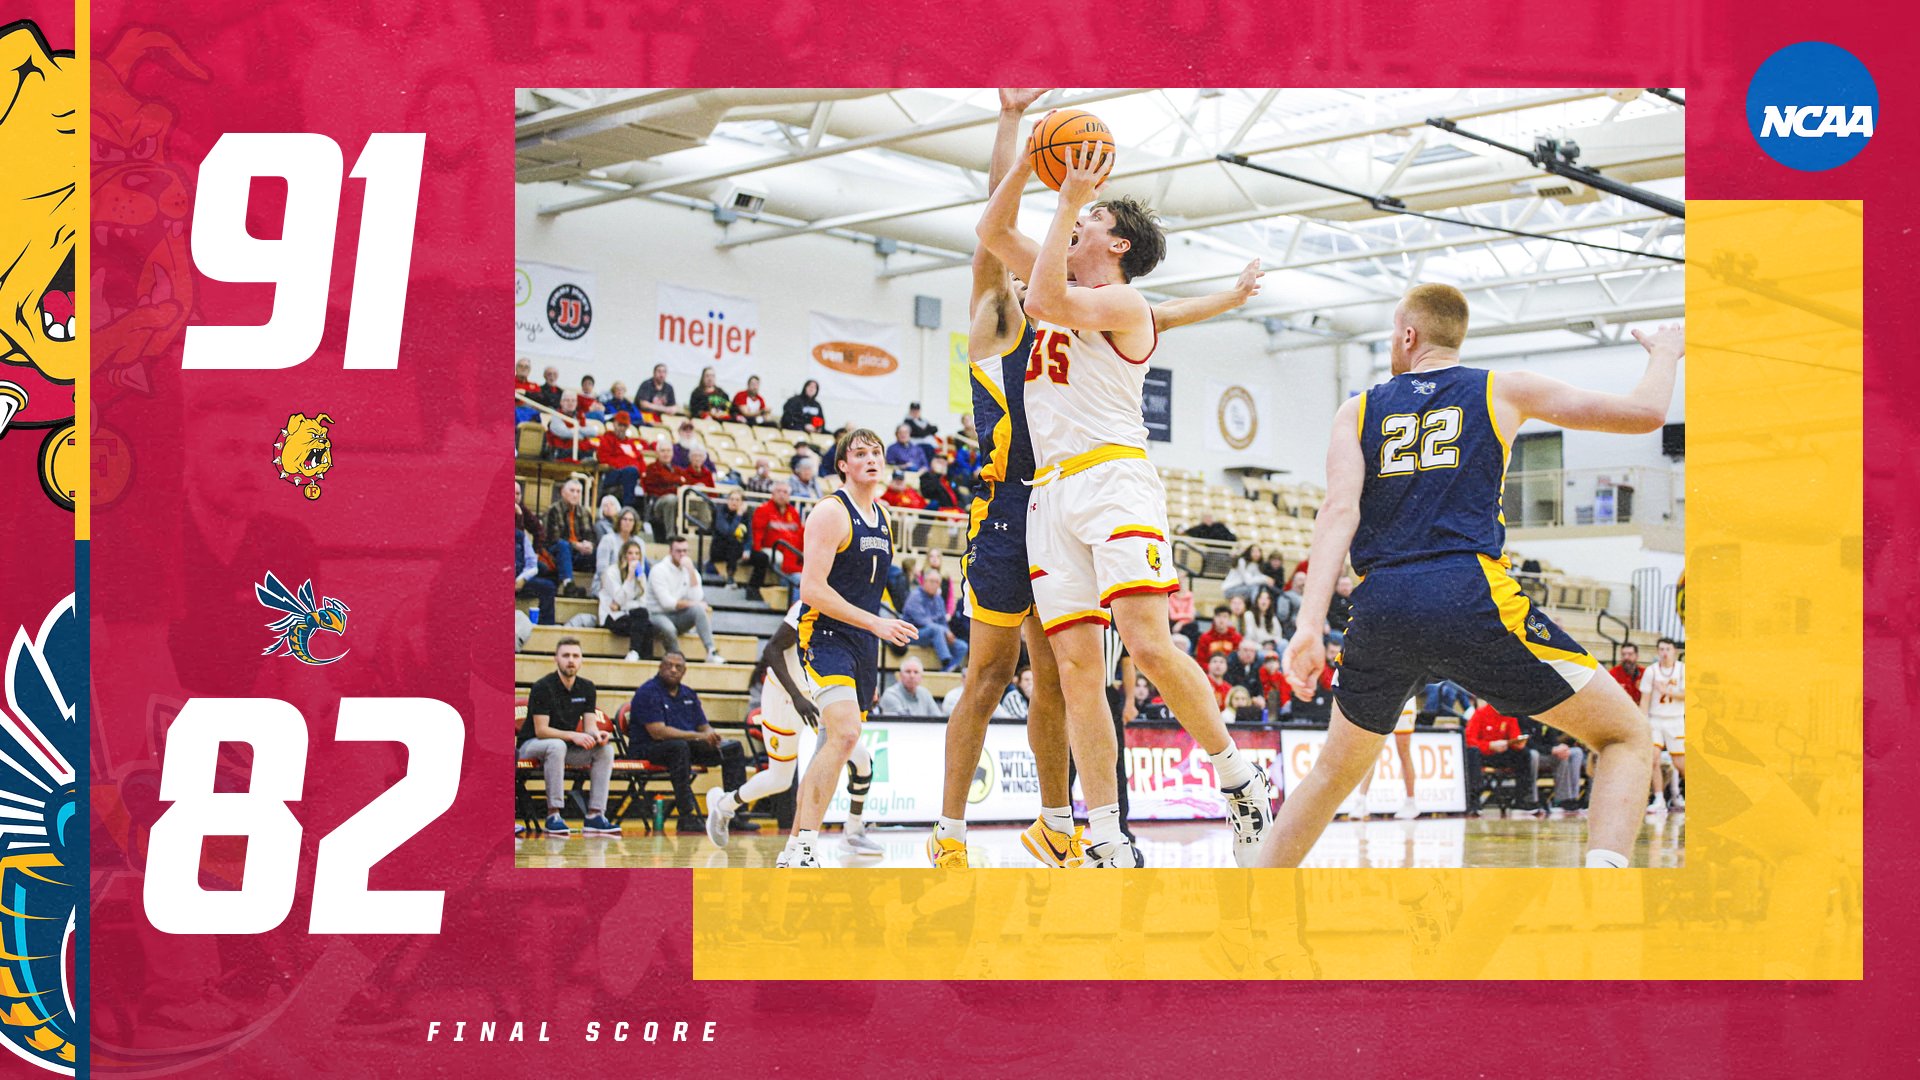 Big Second Half Sparks Ferris State To Regional Victory Over Cedarville